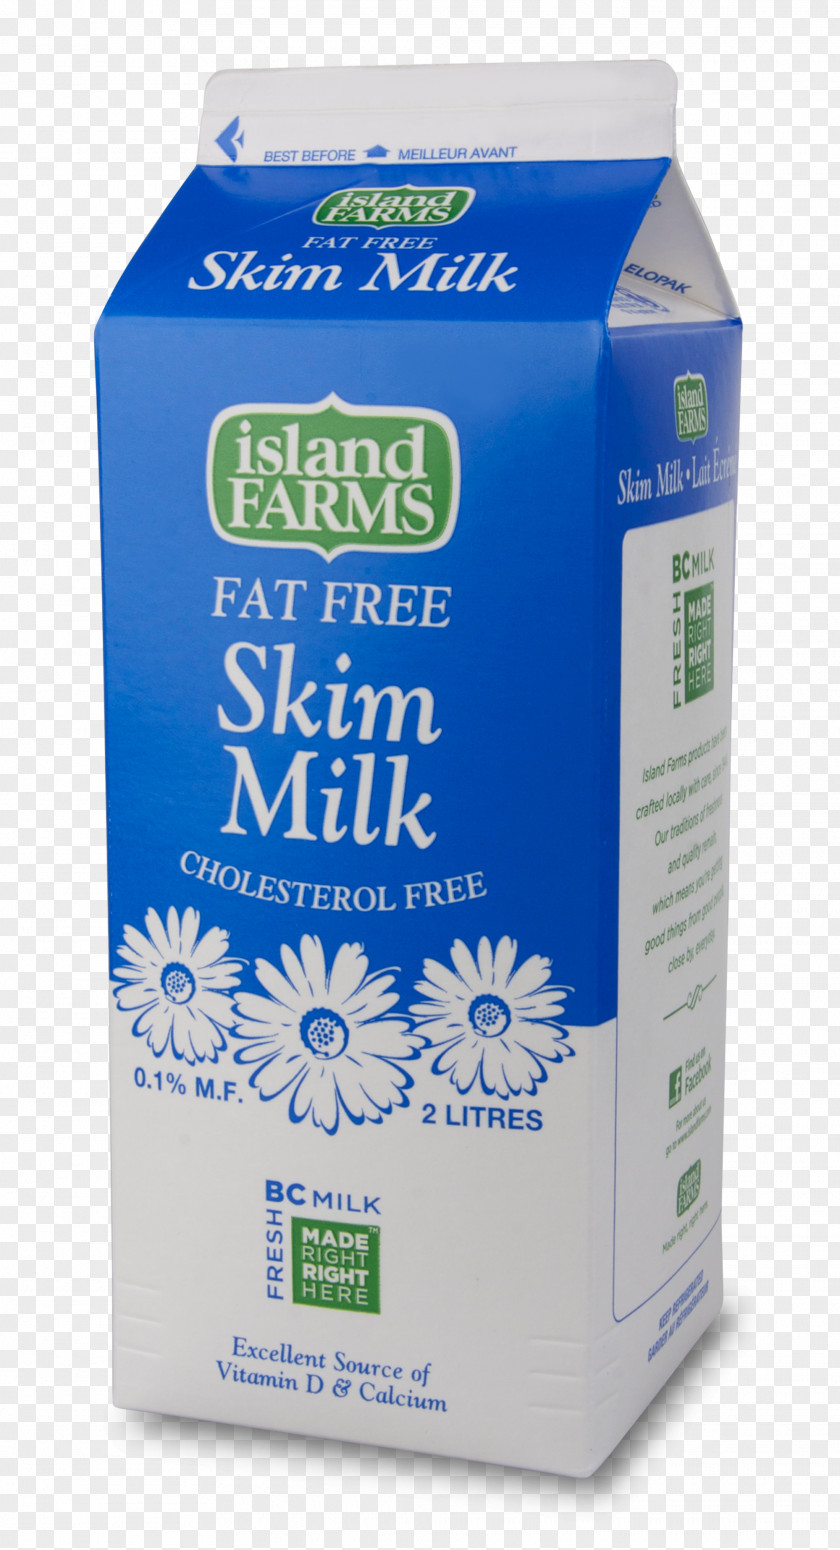 White Chocolate Milk Carton Water Product Agropur Cooperative (Island Farms) PNG